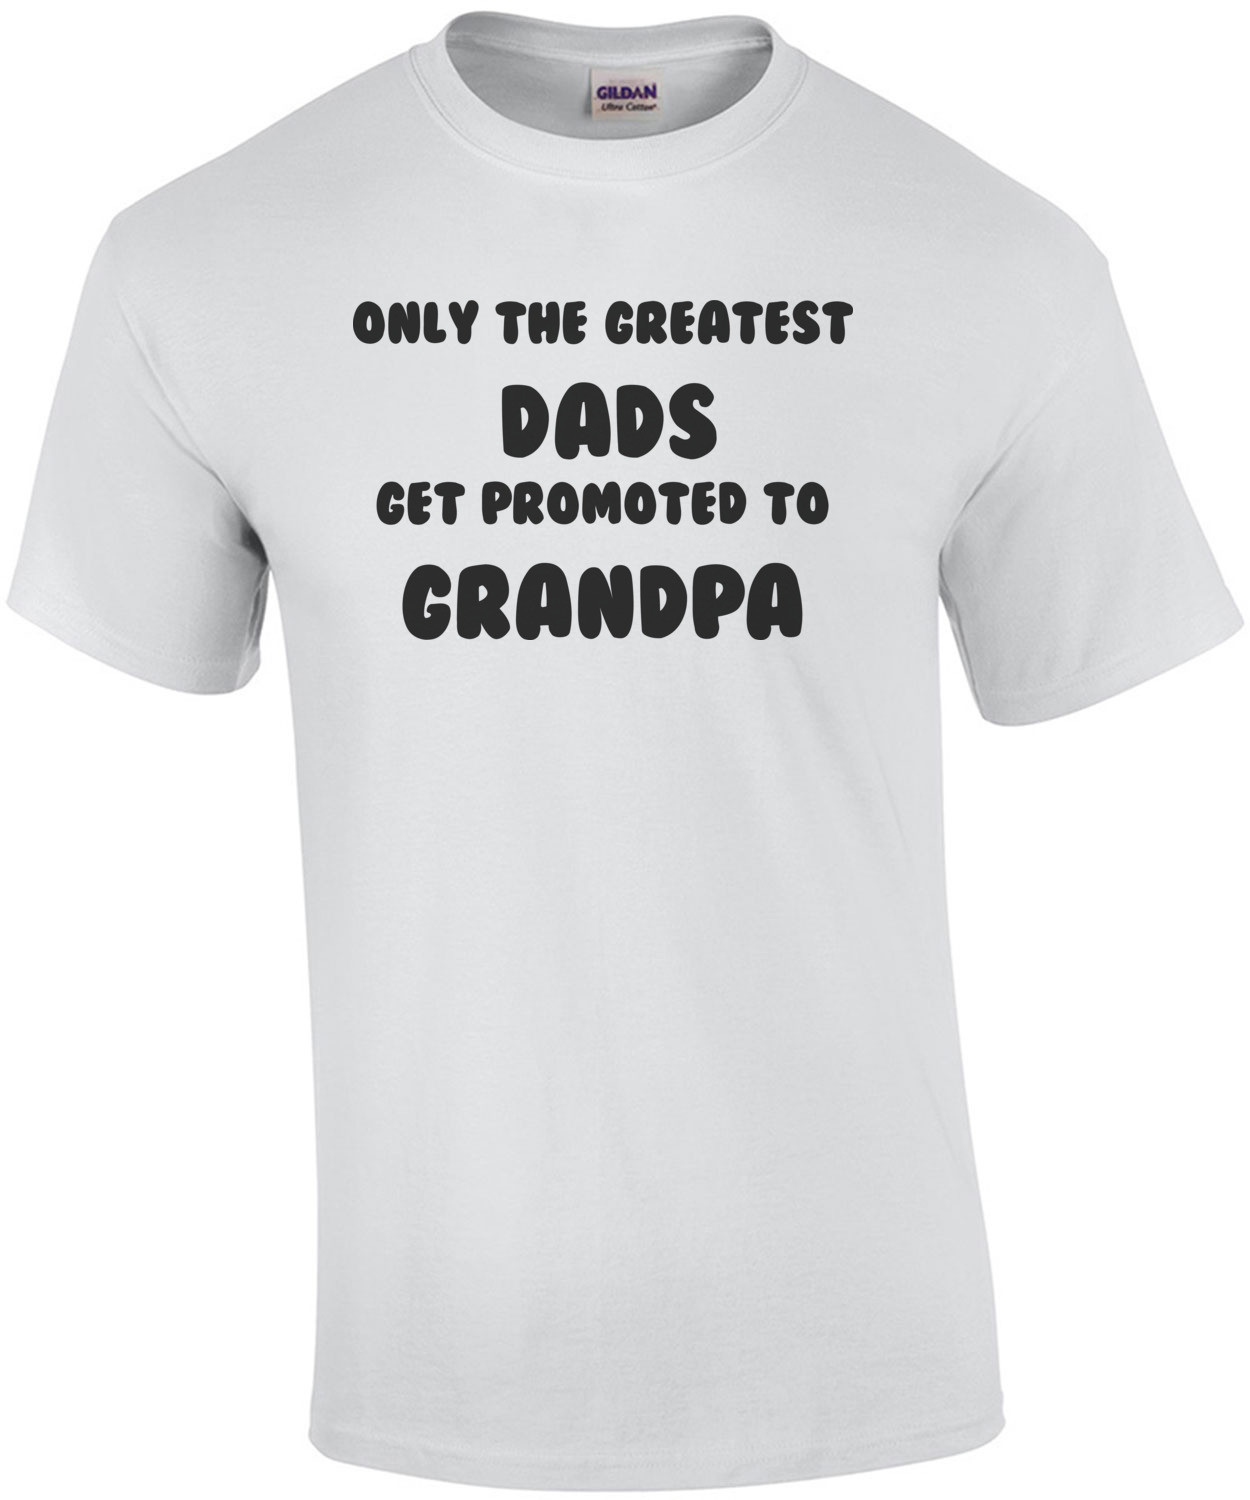 Only the Greatest Dads Get Promoted to Grandpa